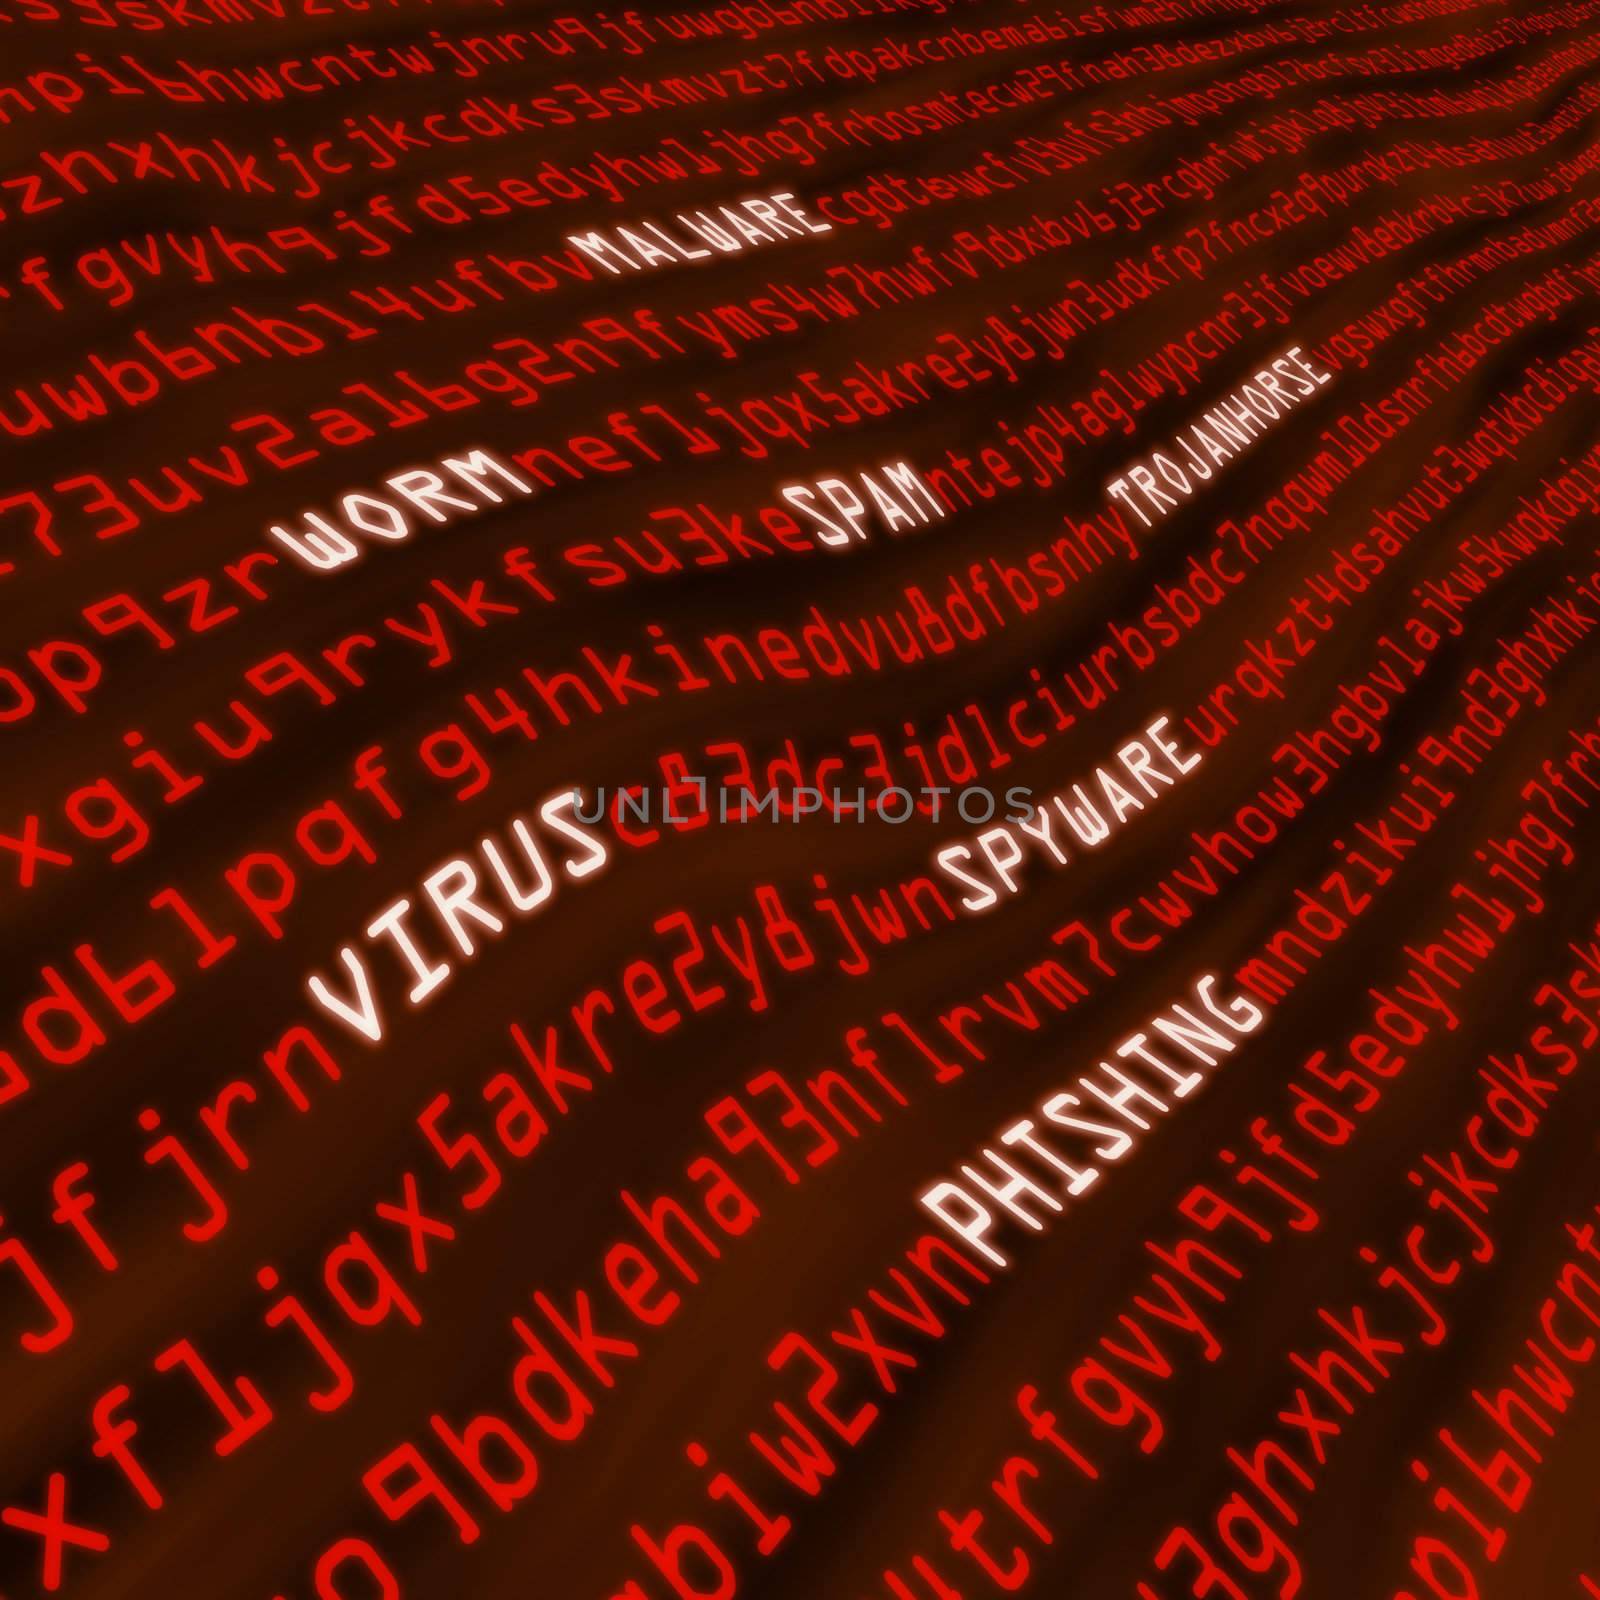 Distorted red field of cyber attack methods by Balefire9